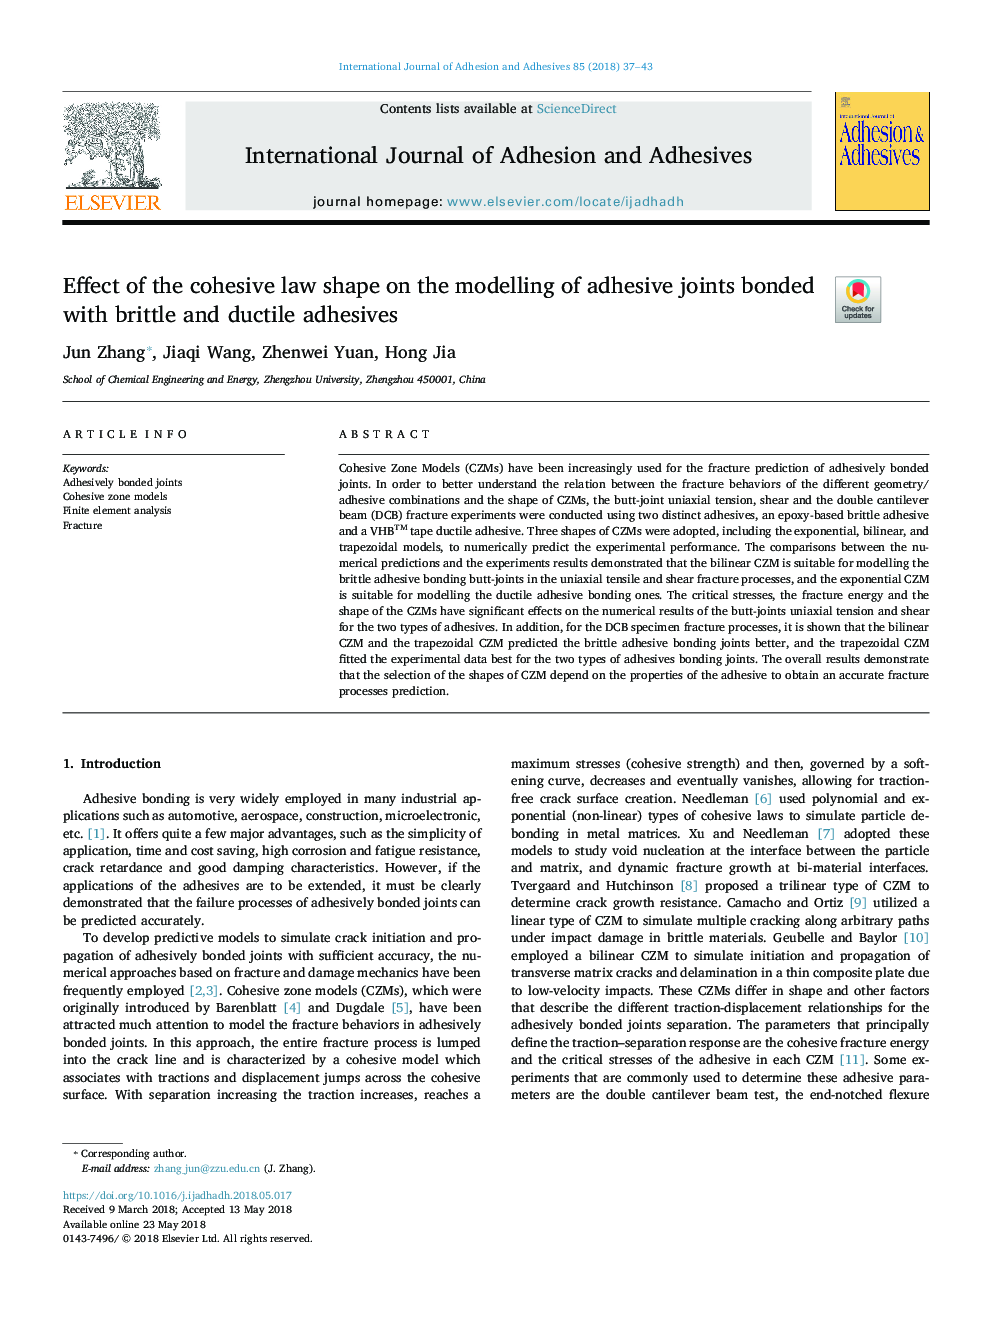 Effect of the cohesive law shape on the modelling of adhesive joints bonded with brittle and ductile adhesives